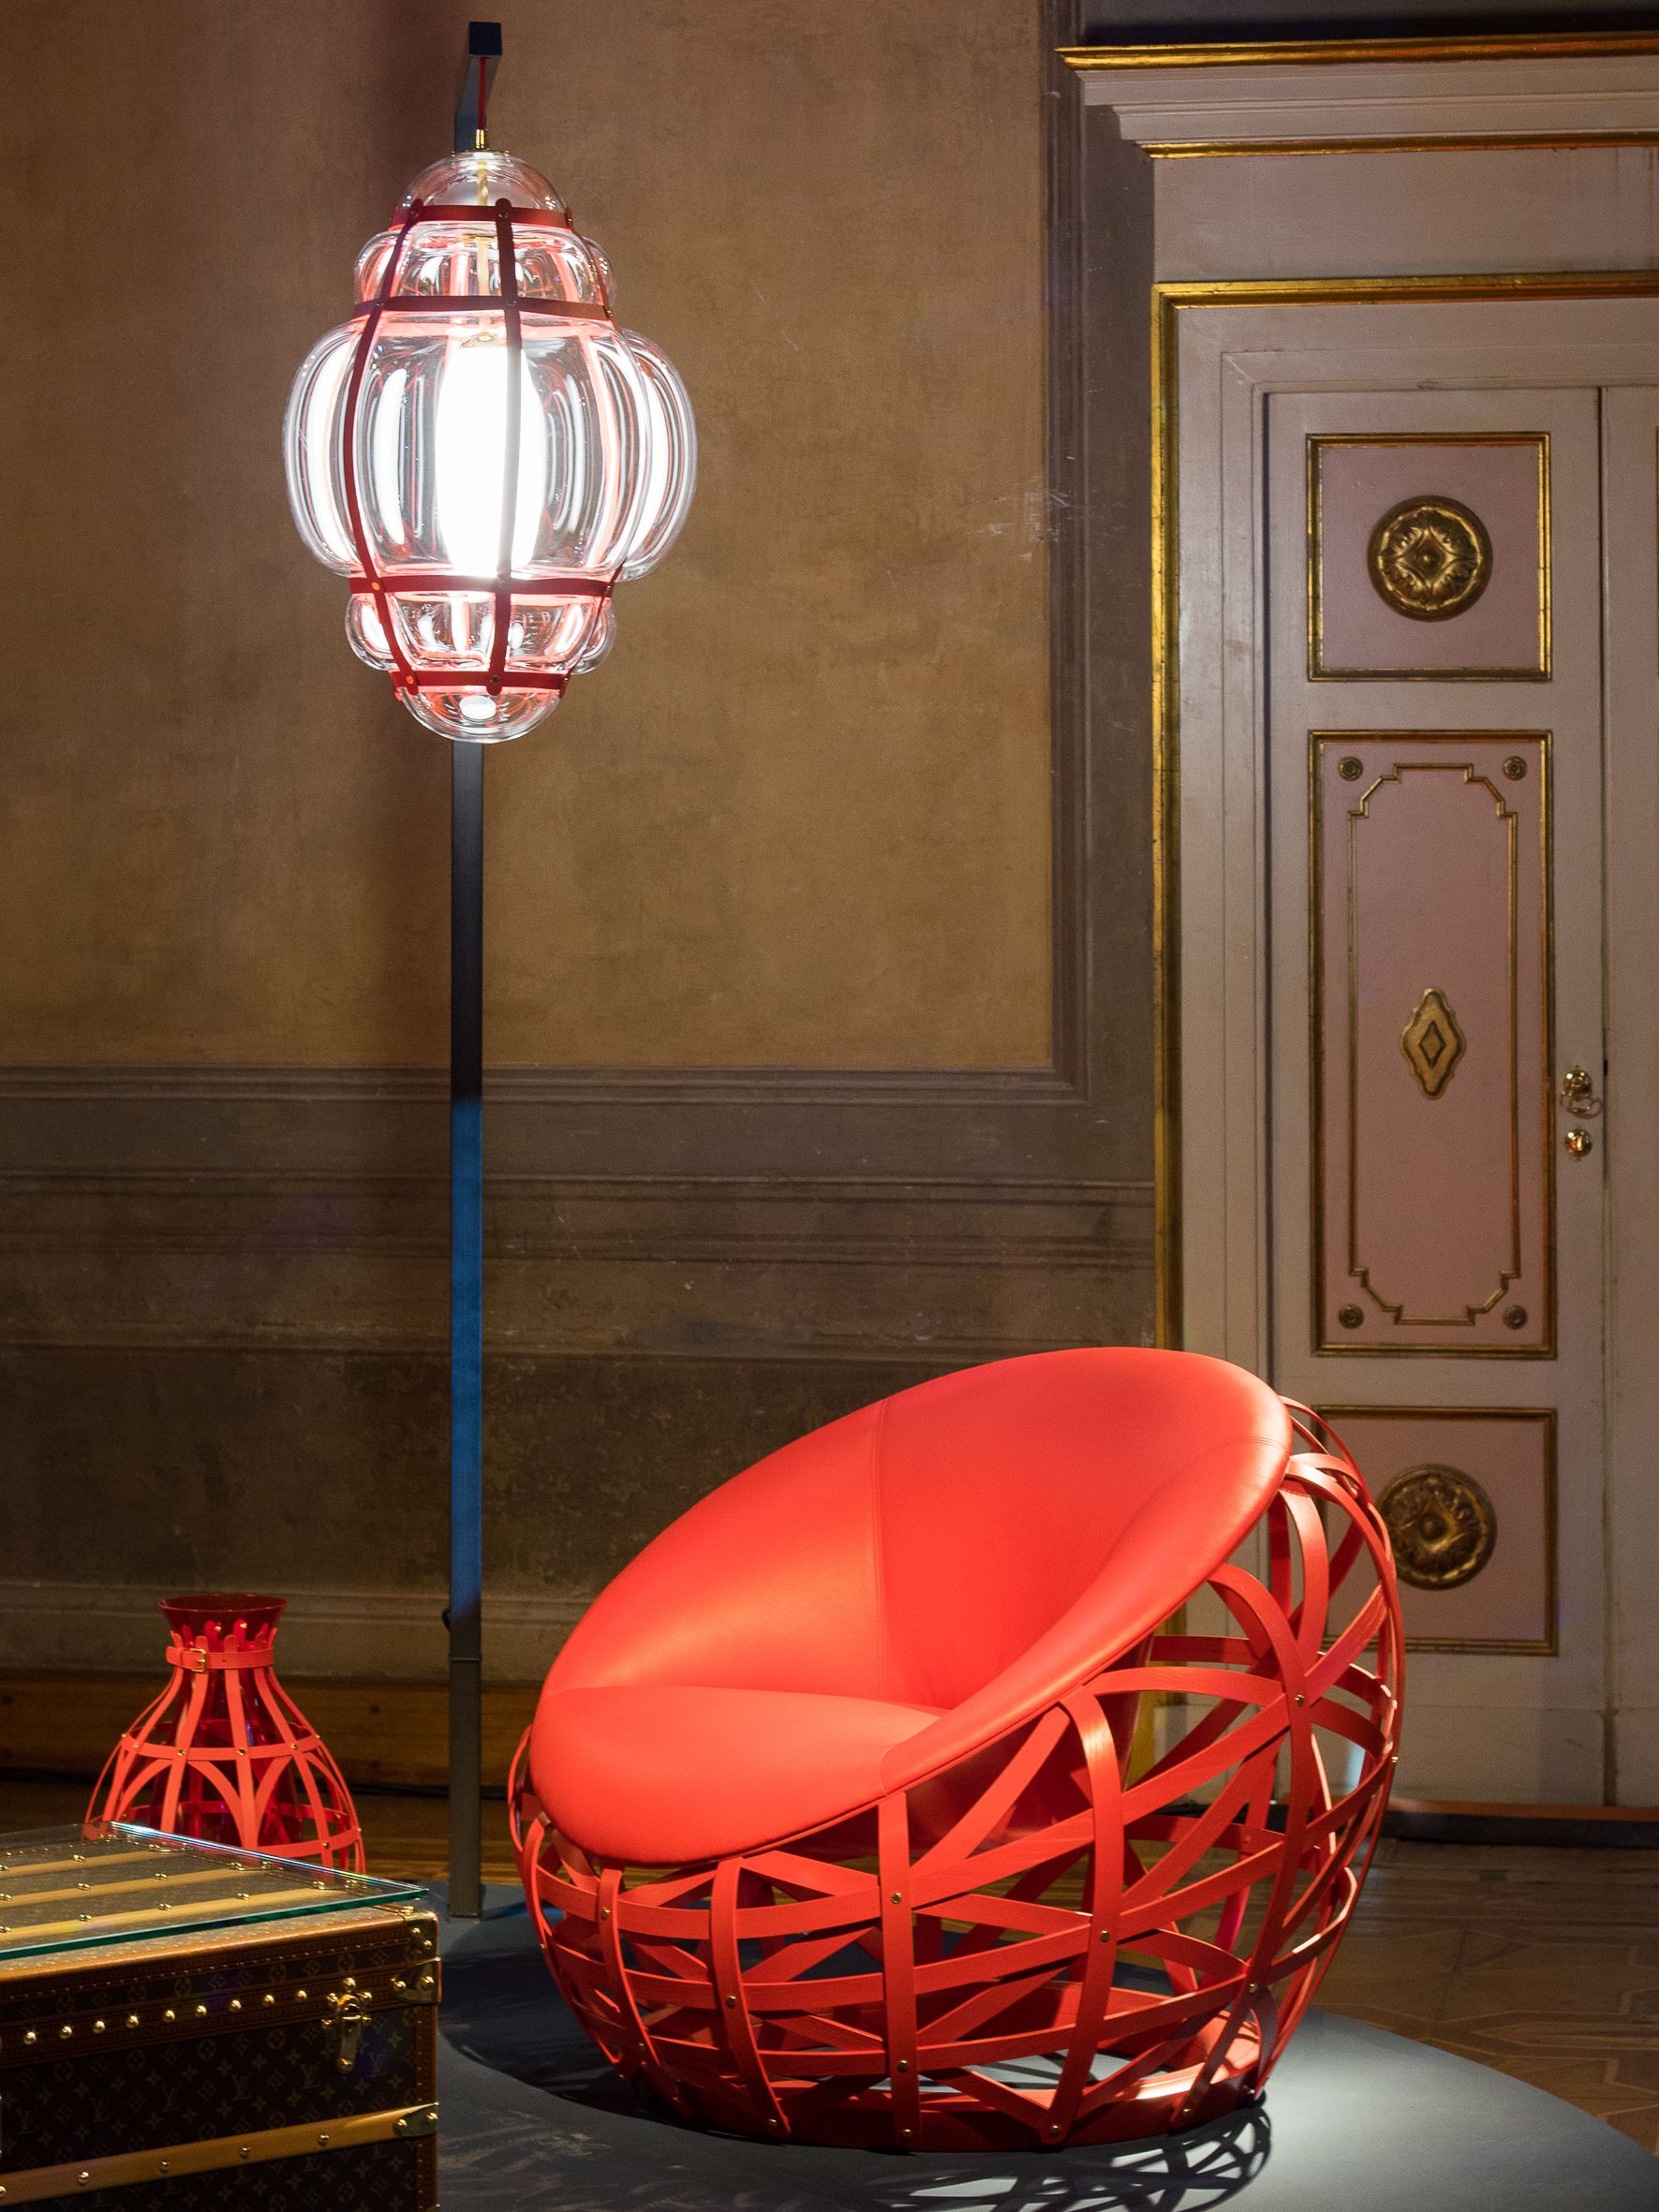 Louis Vuitton Presents Its Latest Objets Nomads at Fuorisalone 2019